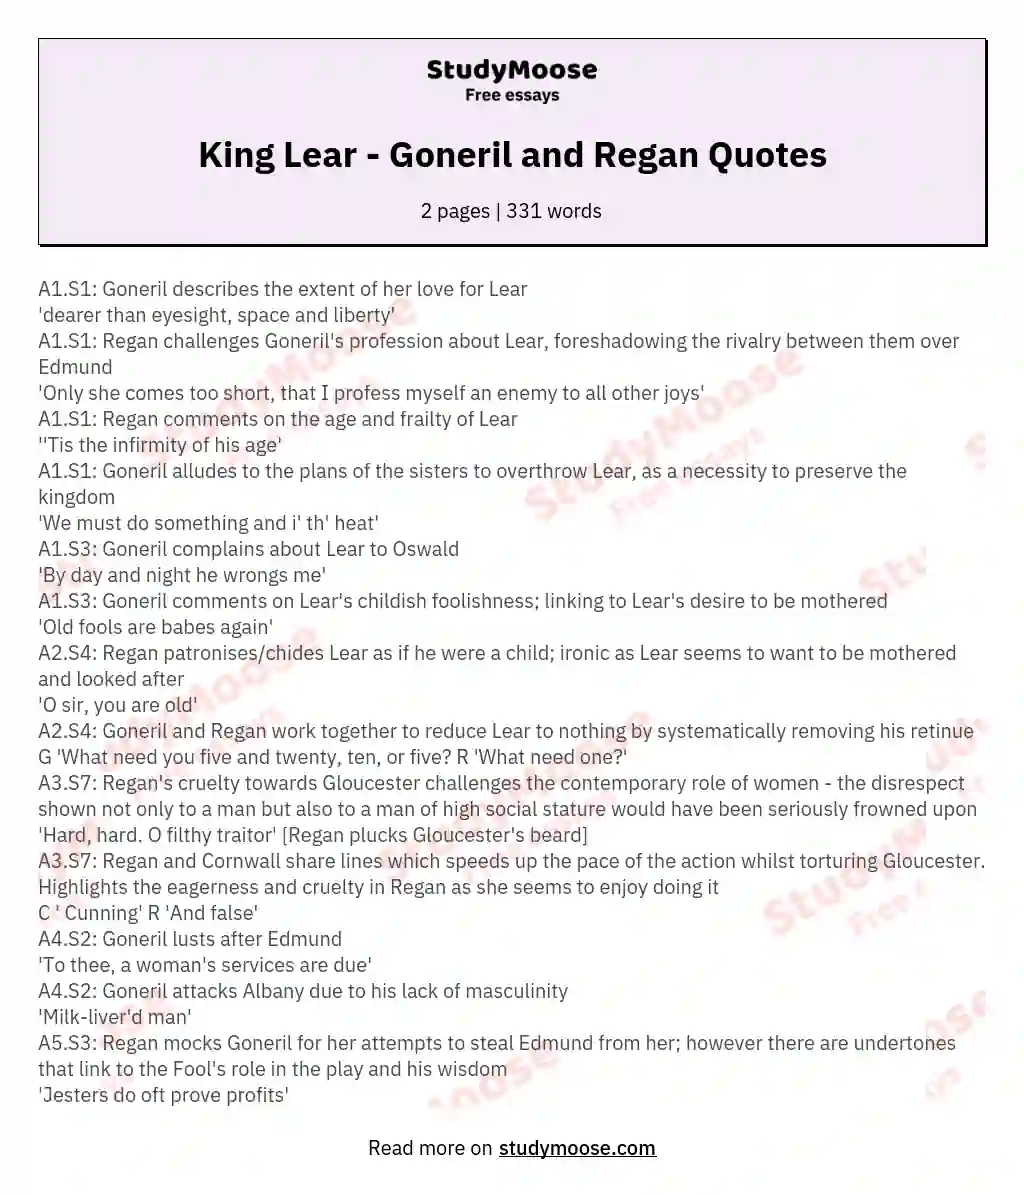 King Lear - Goneril and Regan Quotes